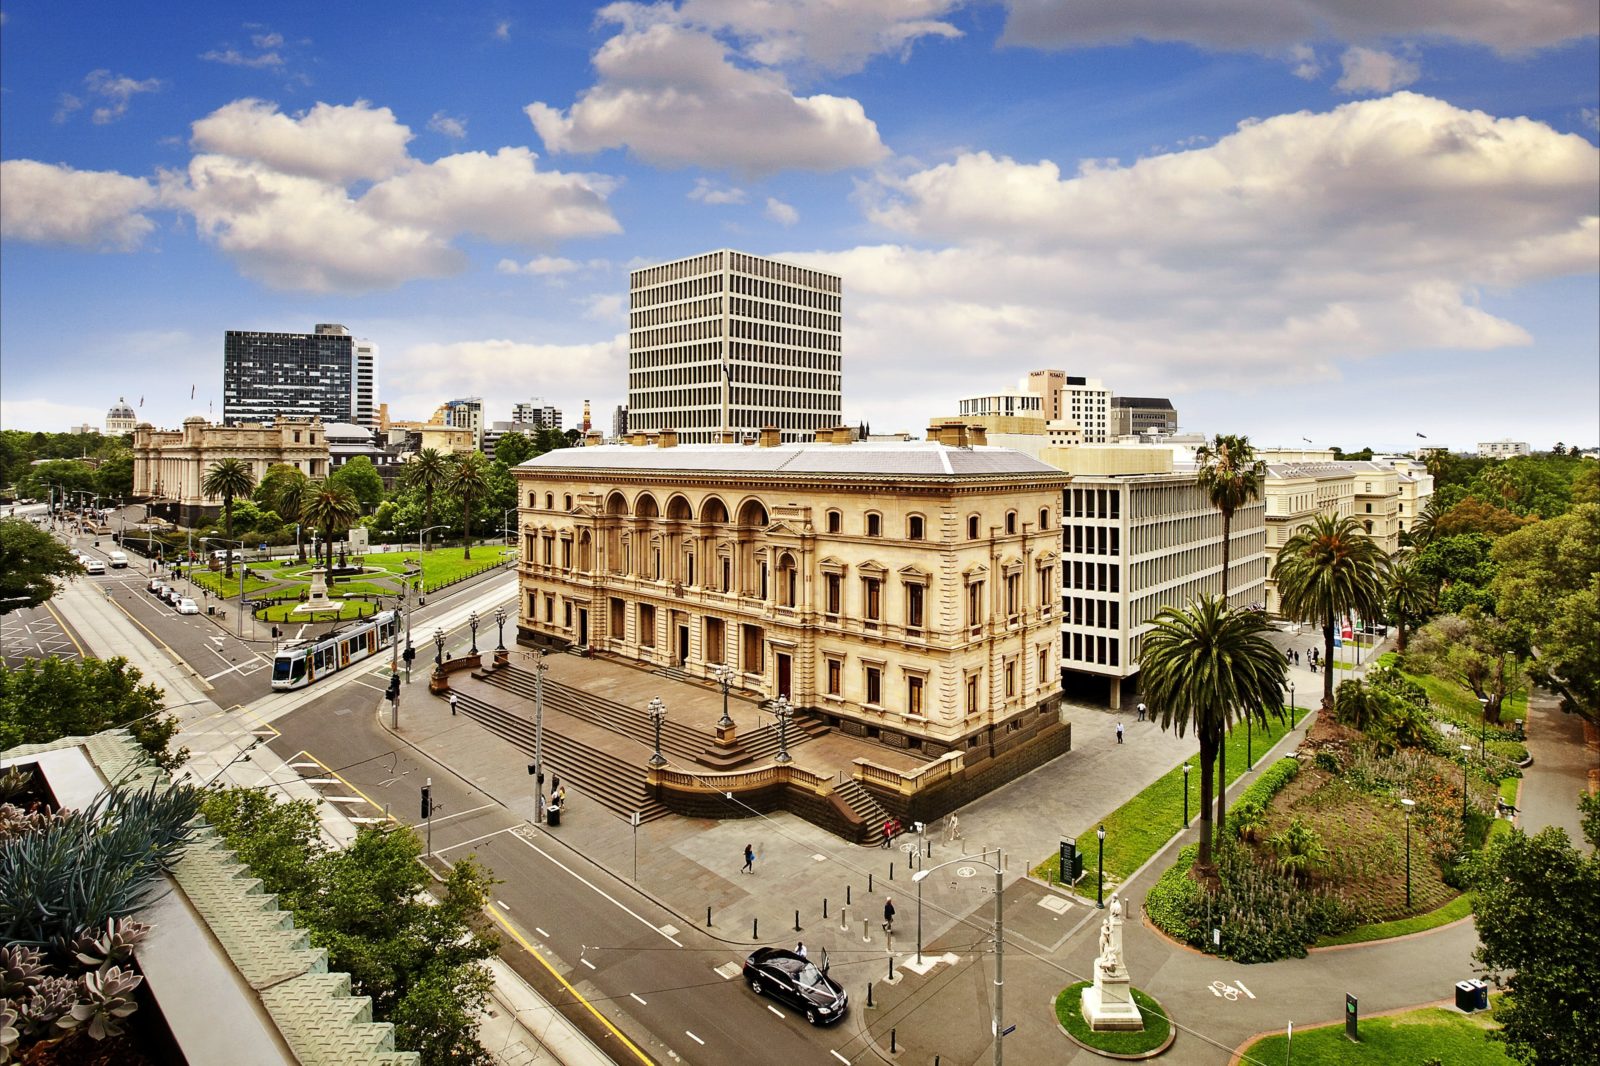 The Old Treasury Building during the day